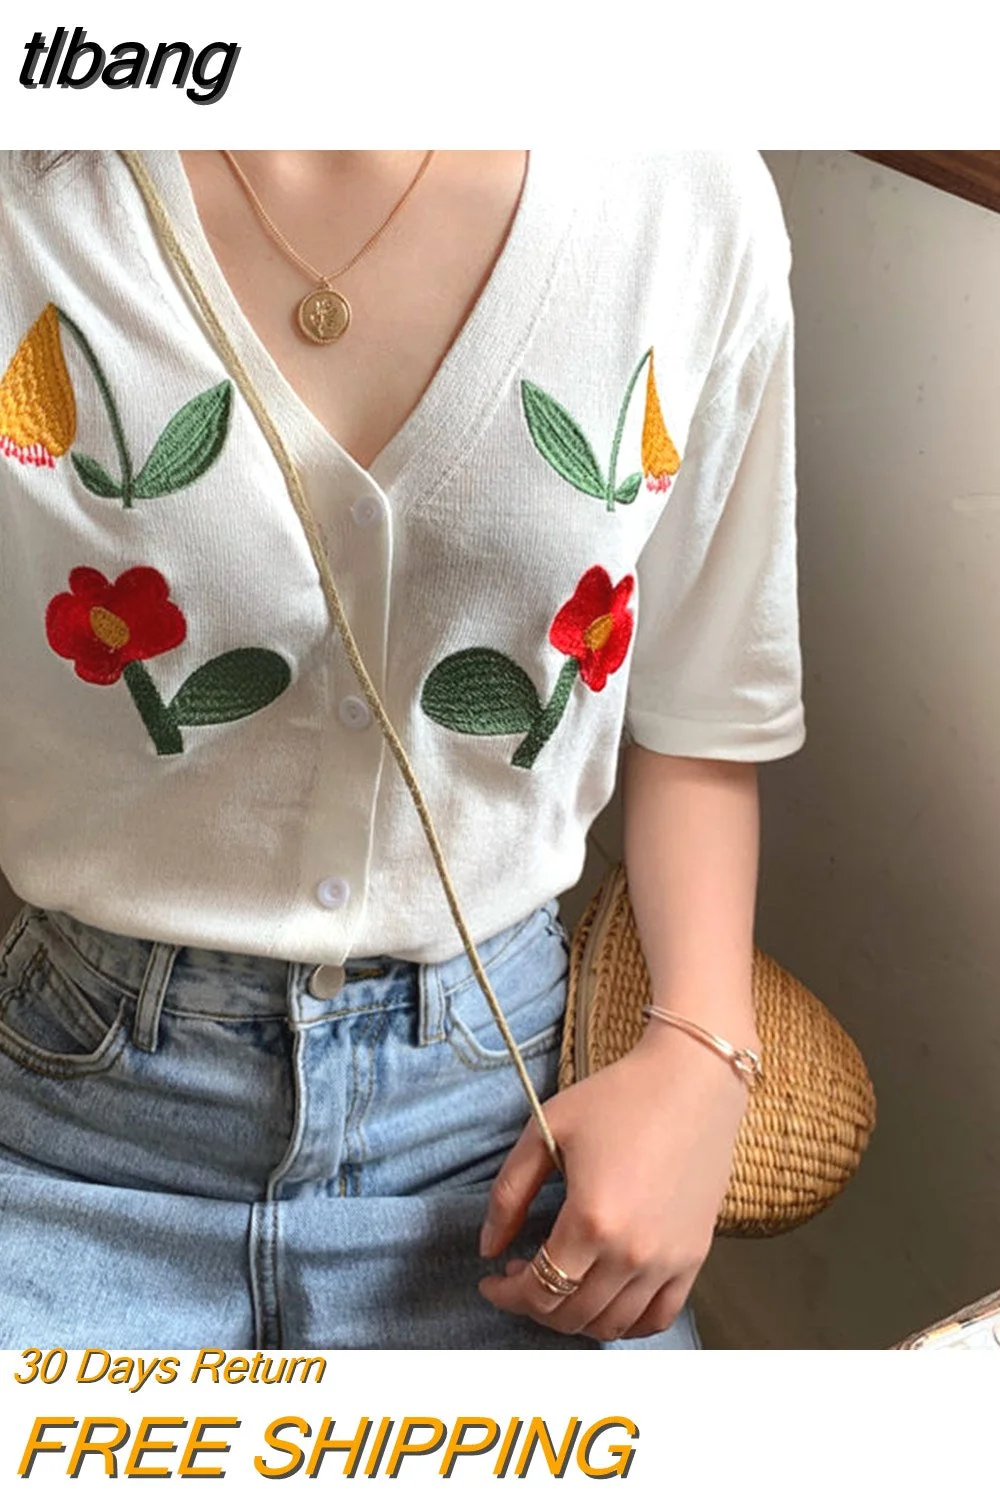 tlbang Women Fashion Embroidery Vintage Knitted Summer Floral Hot Sale V-Neck Casual Sweet Girls Popular Teens Harajuku Chic